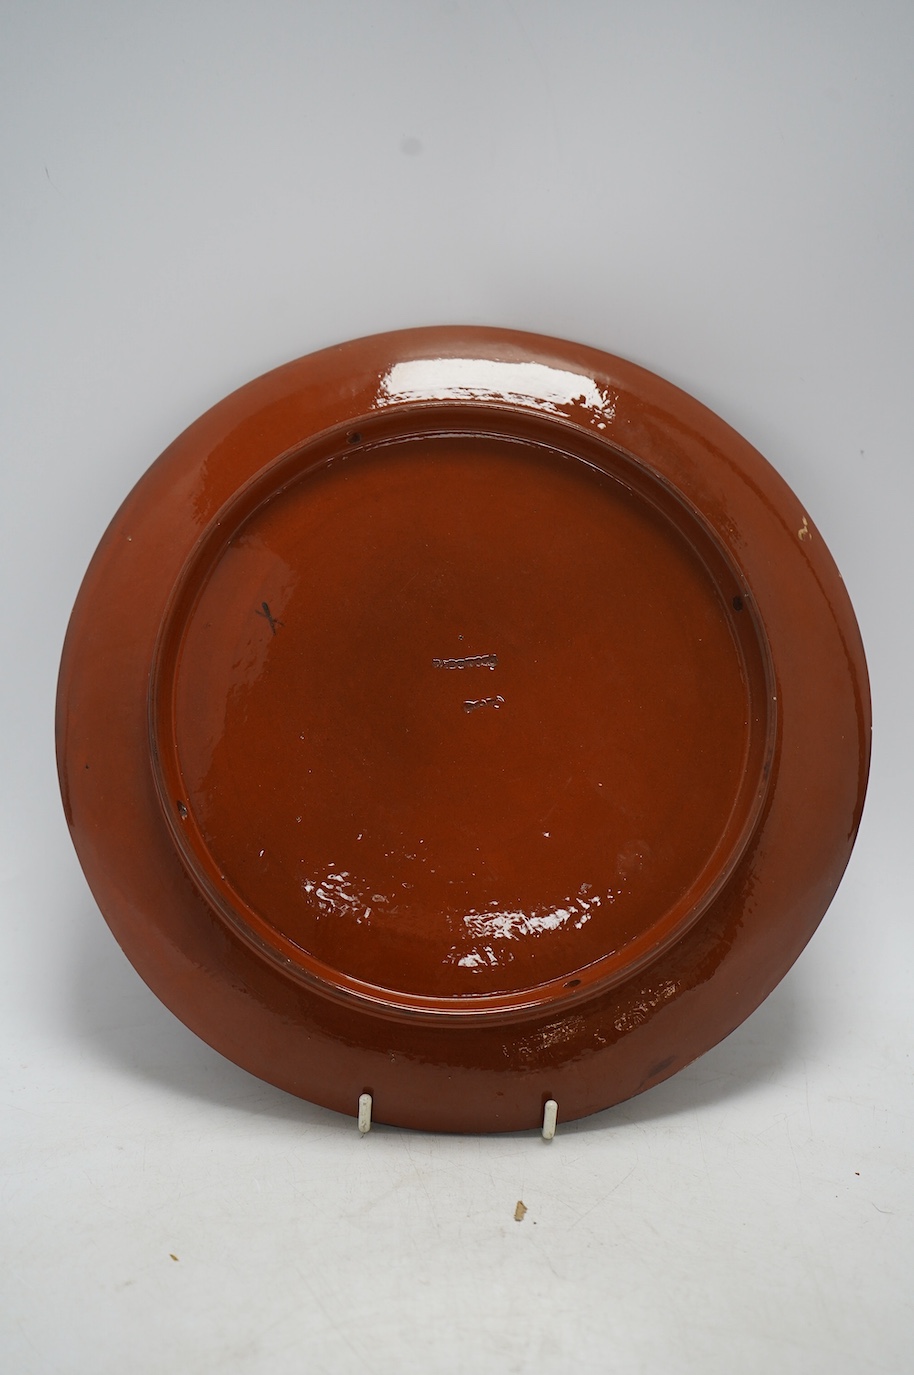 A late 19th century slipware Wedgwood wall plate, decorated with sunflowers, 25cm diameter. Condition - fair to good, some losses to the glaze on the rim